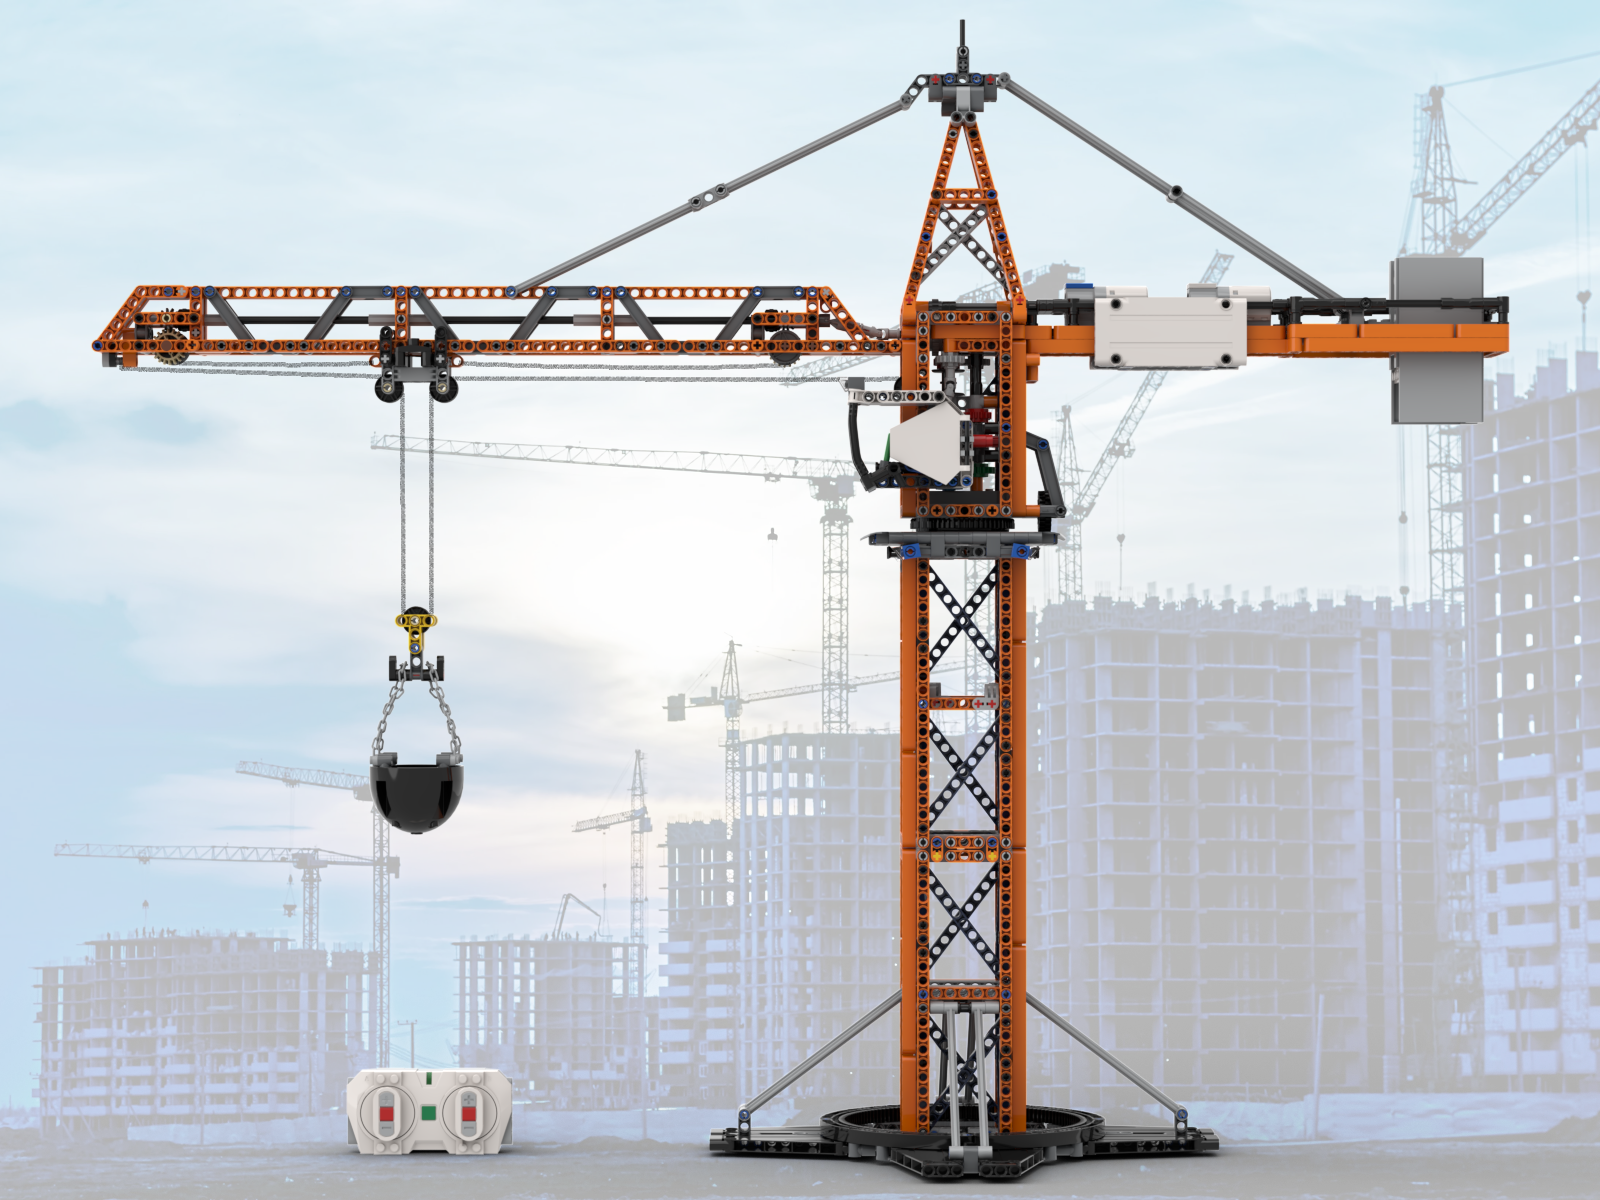 Remote Controlled Tower Crane - MOC - LEGO Technic, Mindstorms, Model Team  and Scale Modeling - Eurobricks Forums